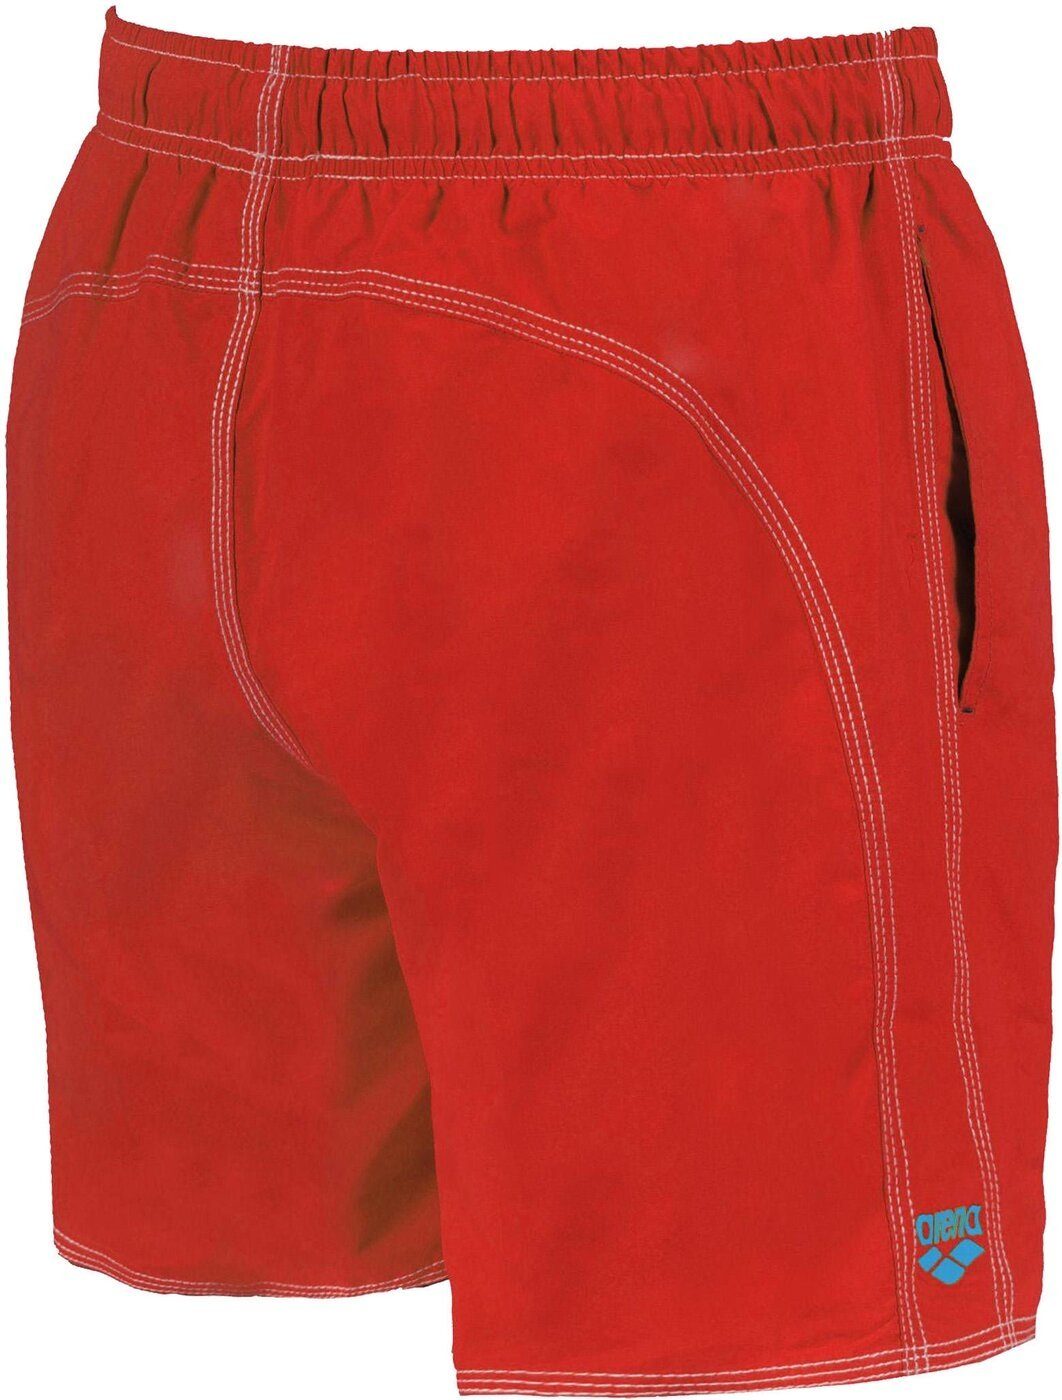 Arena Badeshorts FUNDAMENTALS SOLID 48 RED-TURQUOISE BOXER